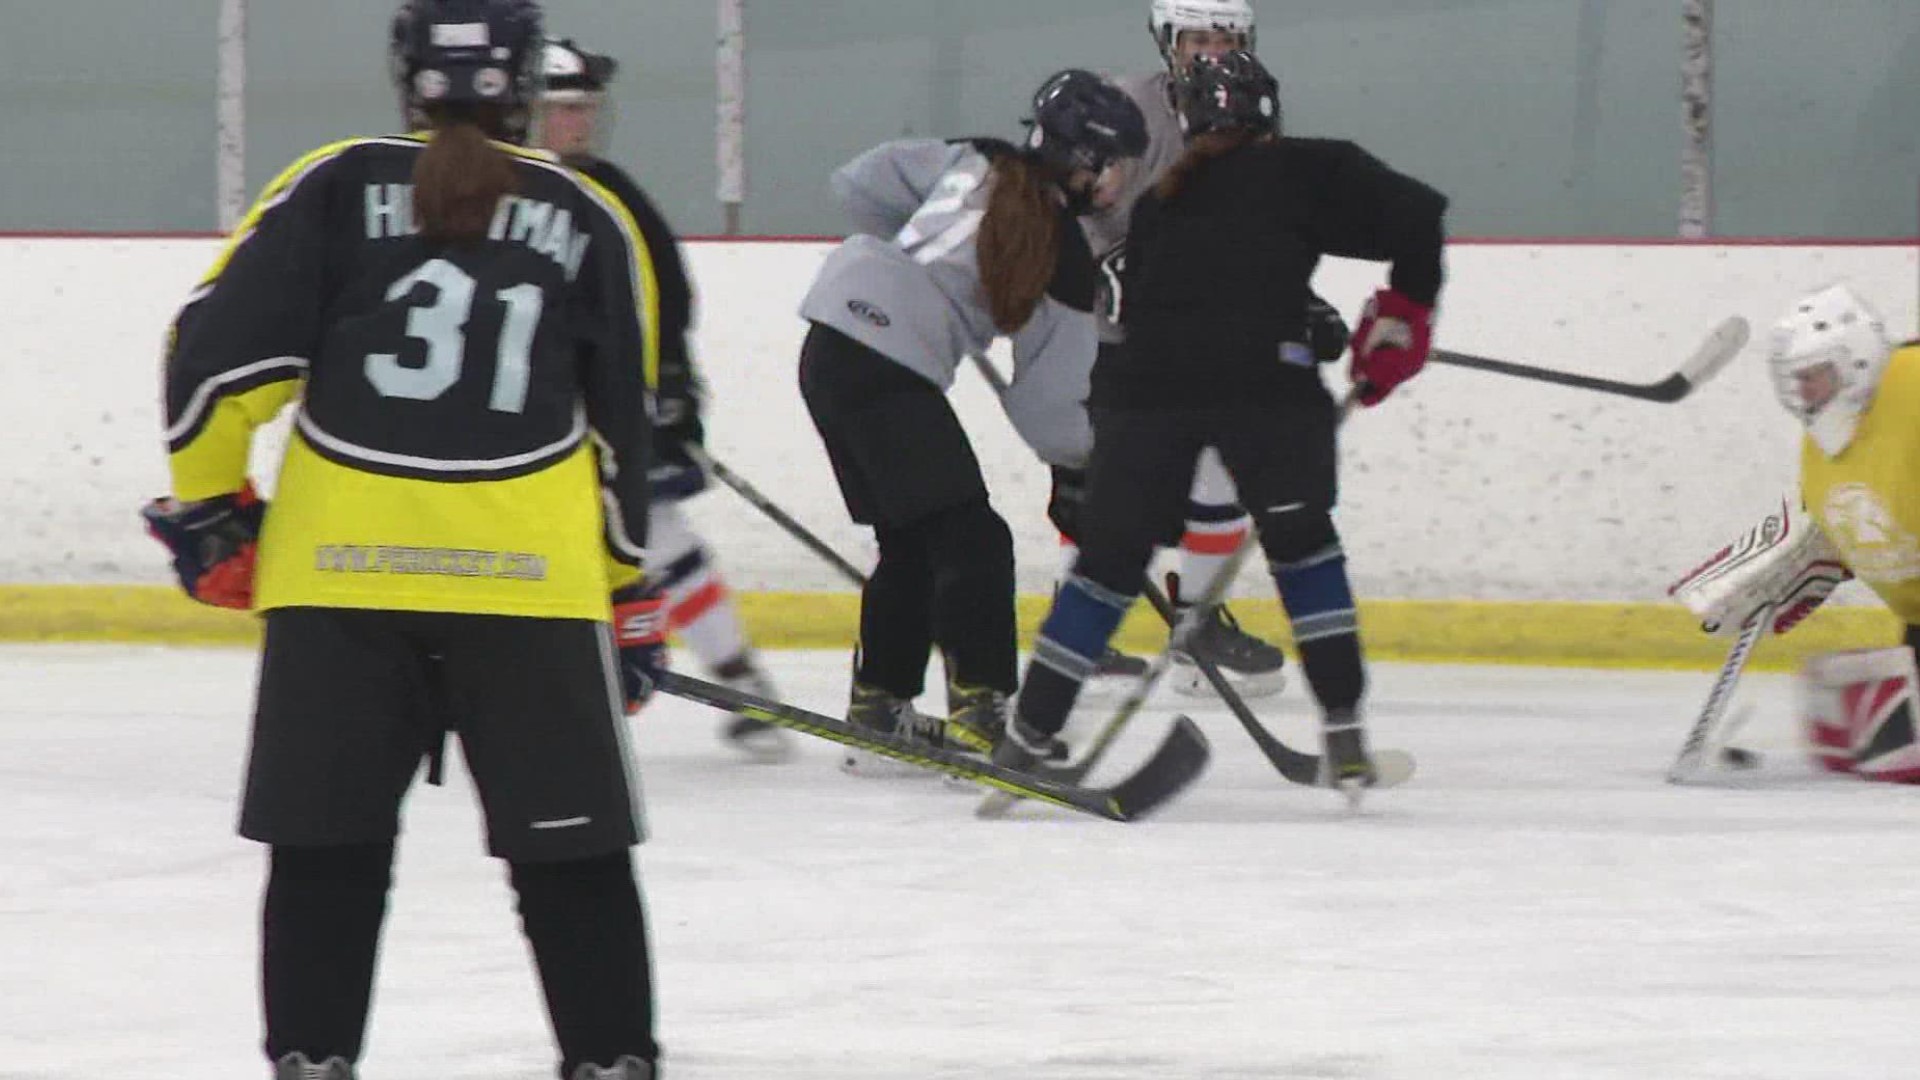 Dave Calabro caught up with some young hockey players from Westfield recently inspired by the Winter Olympics. Some of the players ended up on a national TV spot!